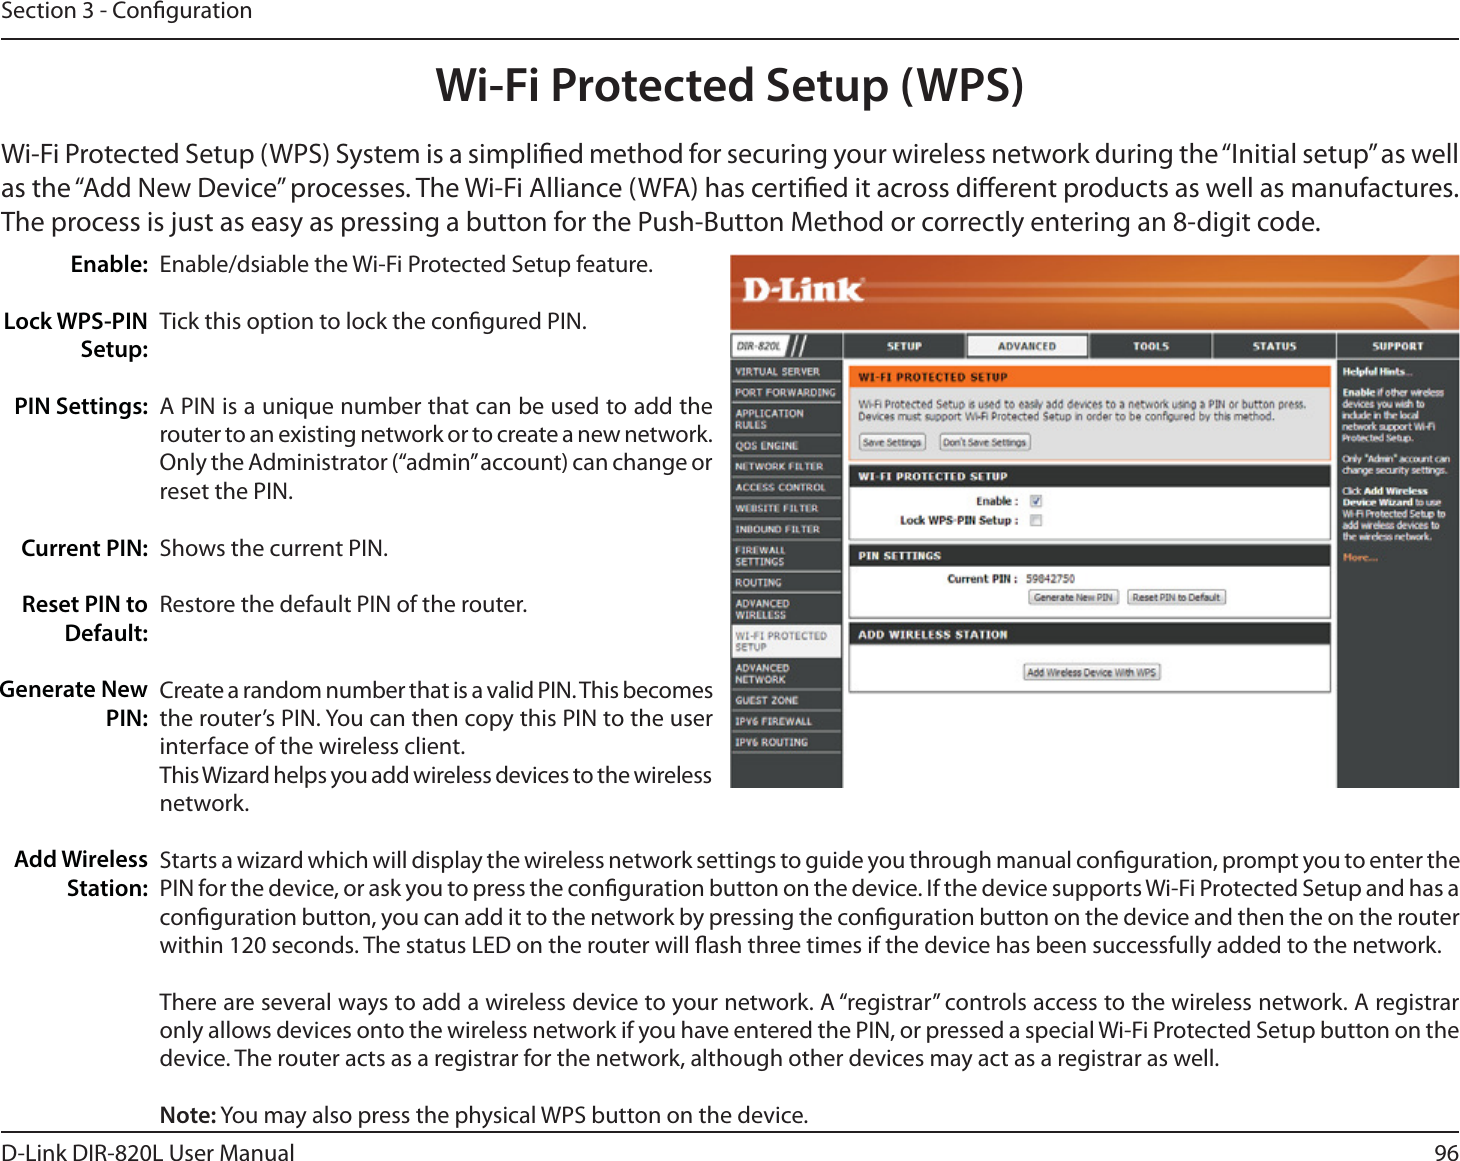 96D-Link DIR-820L User ManualSection 3 - CongurationWi-Fi Protected Setup (WPS)Enable/dsiable the Wi-Fi Protected Setup feature. Tick this option to lock the congured PIN.A PIN is a unique number that can be used to add the router to an existing network or to create a new network. Only the Administrator (“admin” account) can change or reset the PIN. Shows the current PIN. Restore the default PIN of the router. Create a random number that is a valid PIN. This becomes the router’s PIN. You can then copy this PIN to the user interface of the wireless client.This Wizard helps you add wireless devices to the wireless network.Starts a wizard which will display the wireless network settings to guide you through manual conguration, prompt you to enter the PIN for the device, or ask you to press the conguration button on the device. If the device supports Wi-Fi Protected Setup and has a conguration button, you can add it to the network by pressing the conguration button on the device and then the on the router within 120 seconds. The status LED on the router will ash three times if the device has been successfully added to the network.There are several ways to add a wireless device to your network. A “registrar” controls access to the wireless network. A registrar only allows devices onto the wireless network if you have entered the PIN, or pressed a special Wi-Fi Protected Setup button on the device. The router acts as a registrar for the network, although other devices may act as a registrar as well.Note: You may also press the physical WPS button on the device.Enable:Lock WPS-PIN Setup:PIN Settings:Current PIN:Reset PIN to Default:Generate New PIN:Add Wireless Station:Wi-Fi Protected Setup (WPS) System is a simplied method for securing your wireless network during the “Initial setup” as well as the “Add New Device” processes. The Wi-Fi Alliance (WFA) has certied it across dierent products as well as manufactures. The process is just as easy as pressing a button for the Push-Button Method or correctly entering an 8-digit code.